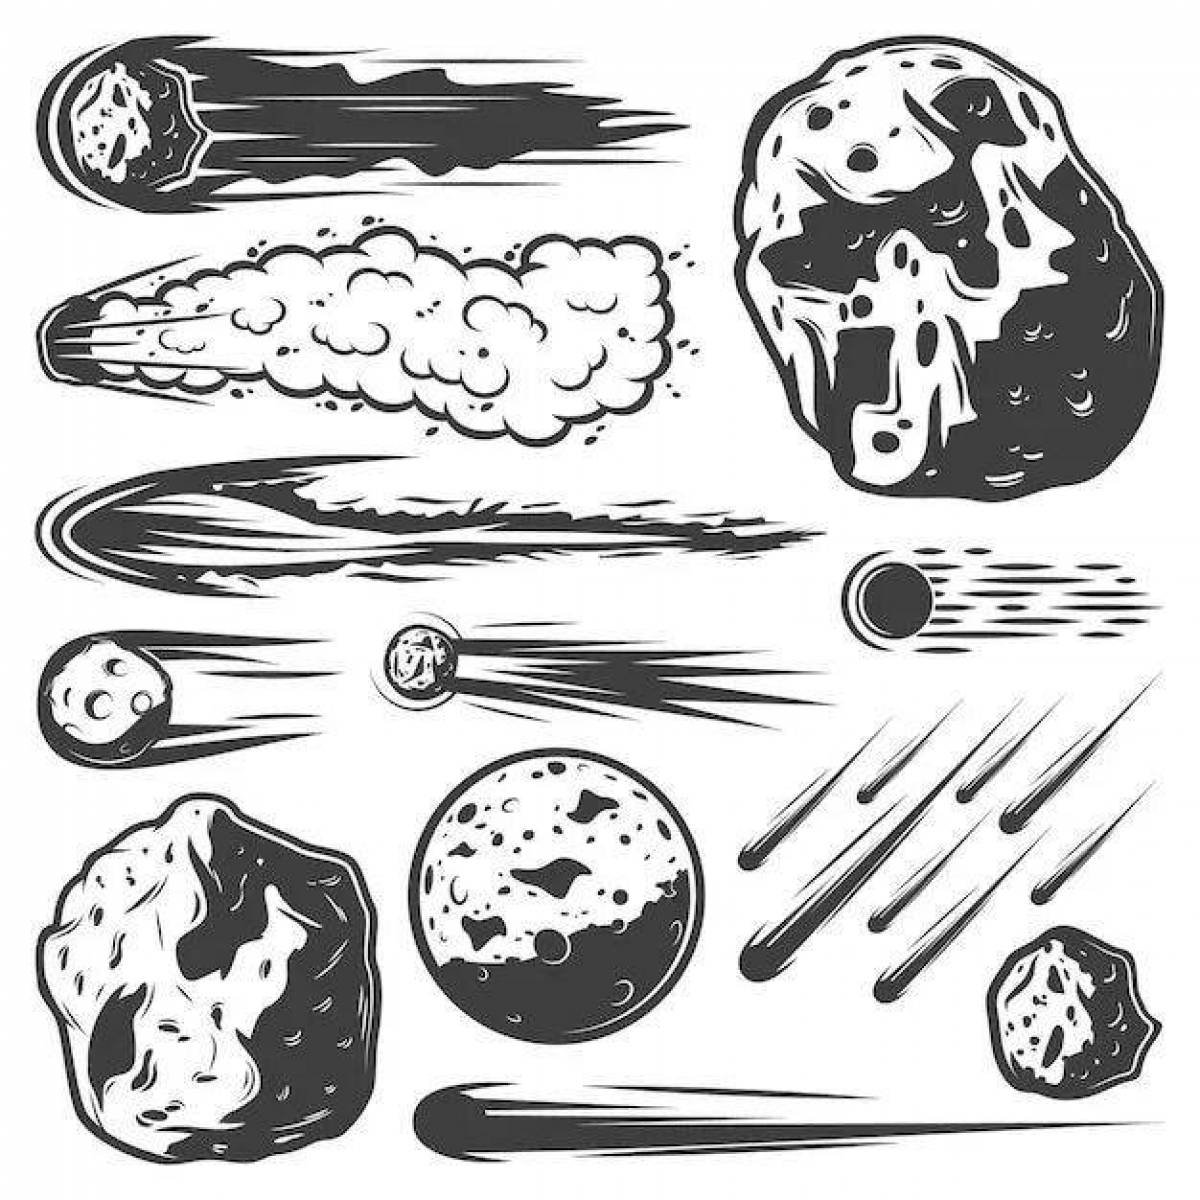 Gorgeous meteorite coloring page